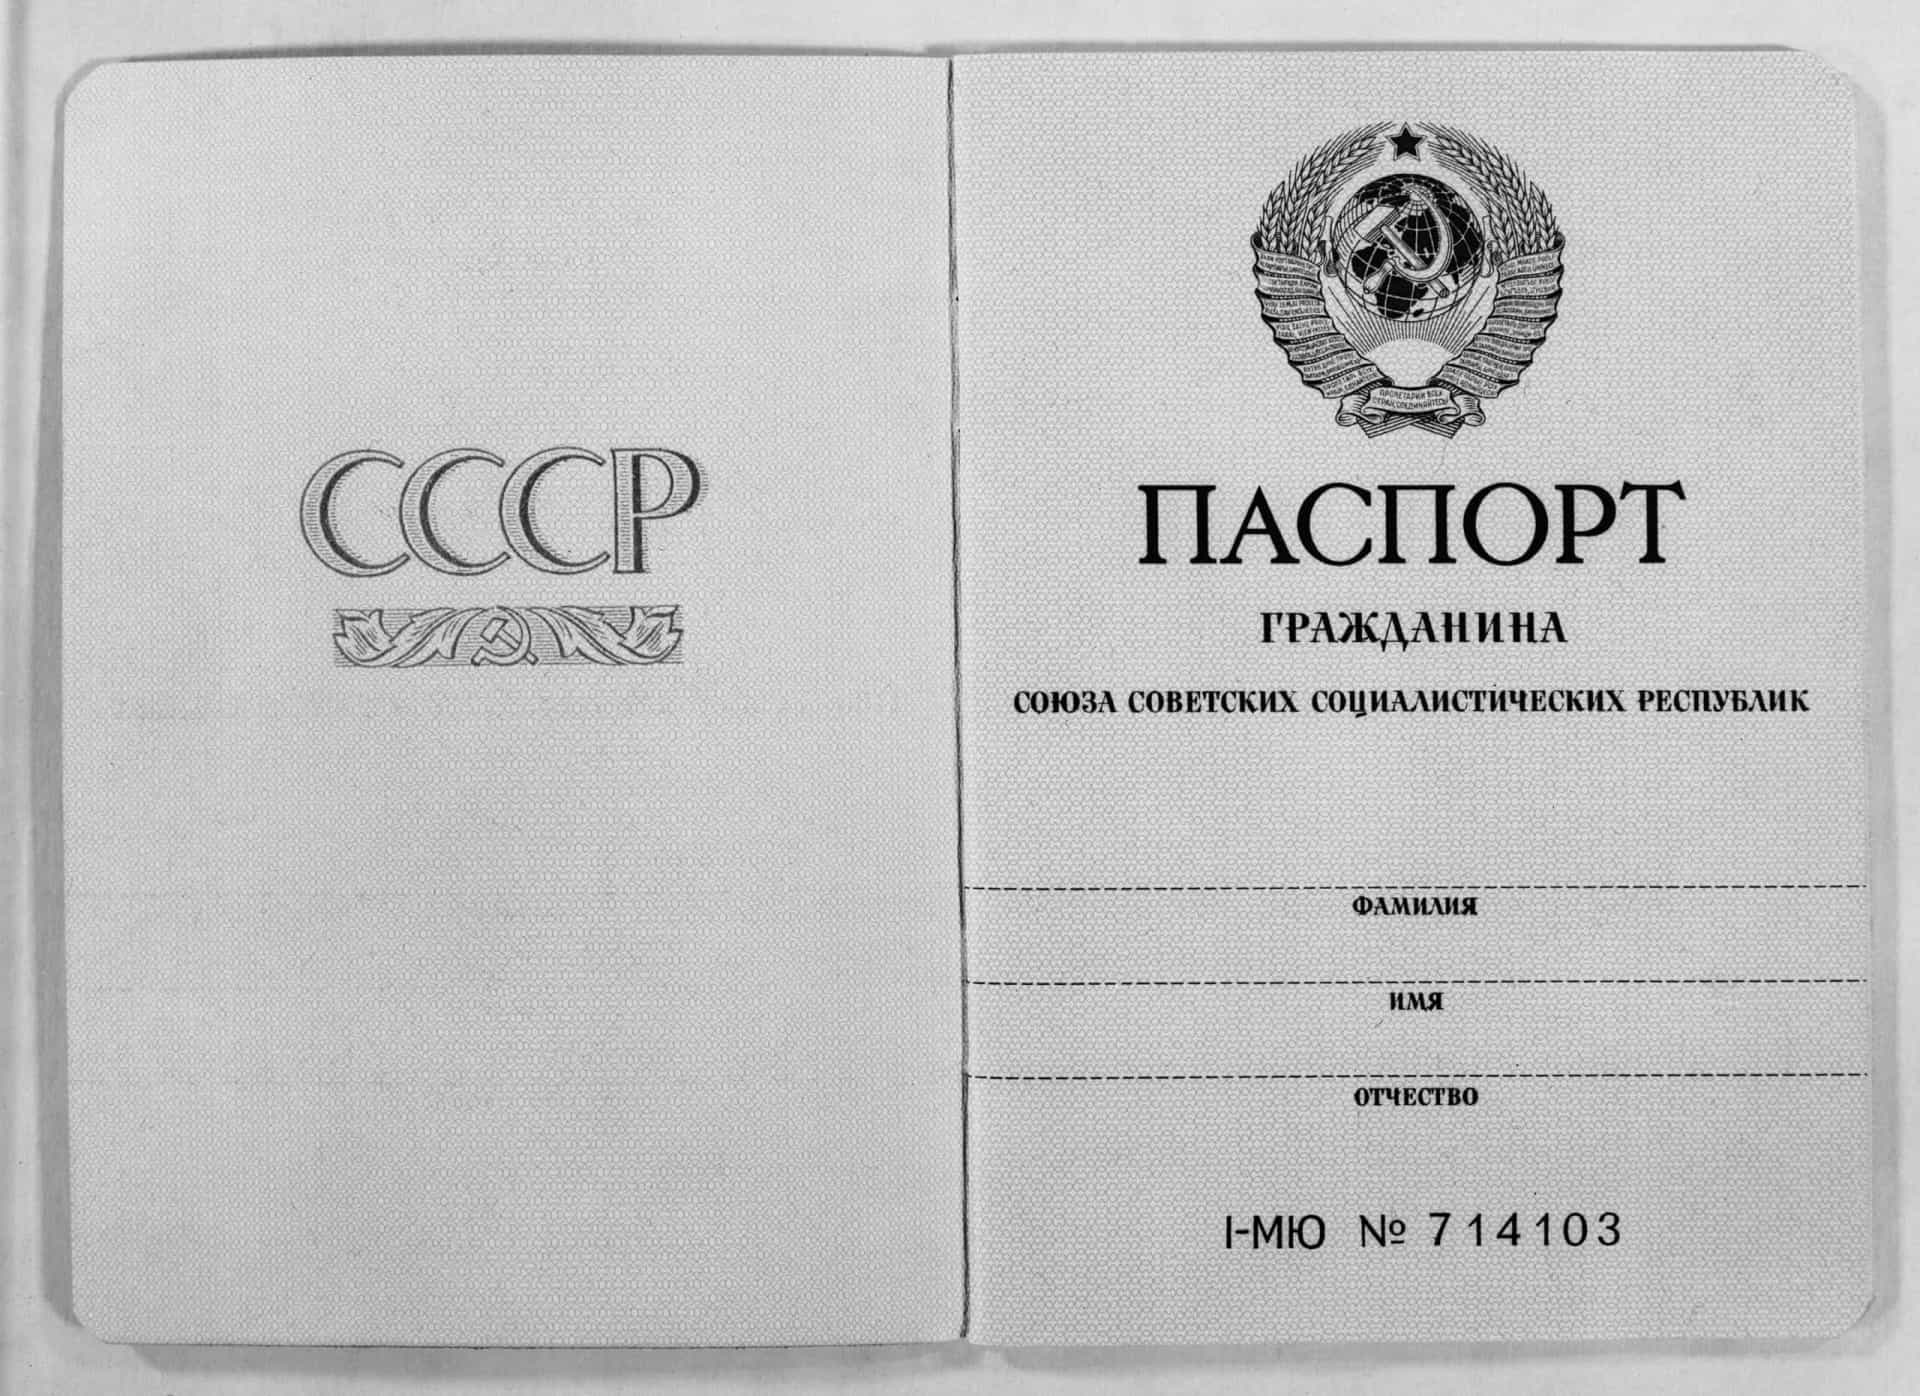 <p>Sharp-eyed USSR counter intelligence officials could always spot a fake Soviet passport because the metal staples wouldn't rust. Their real passports were made using inferior quality metals that corroded very quickly.</p>